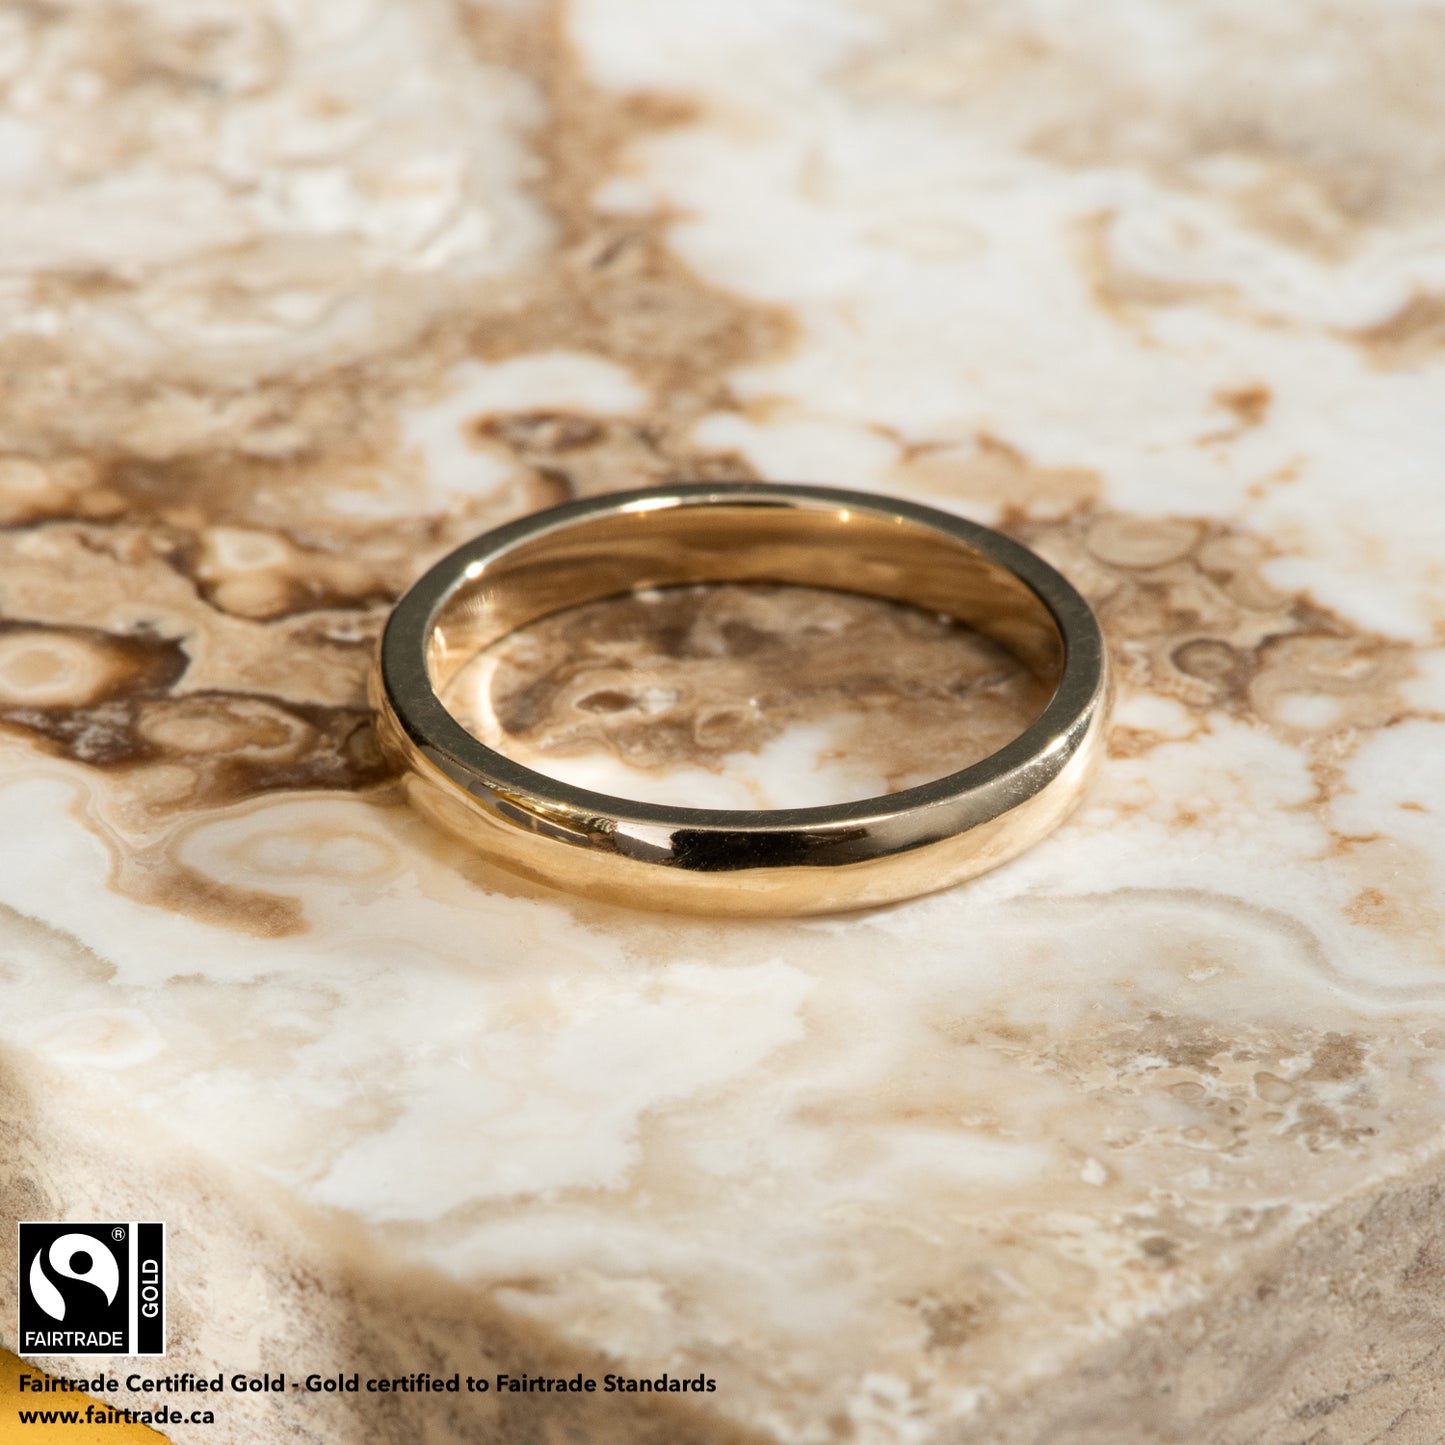 The Classic with Fairtrade Certified Gold